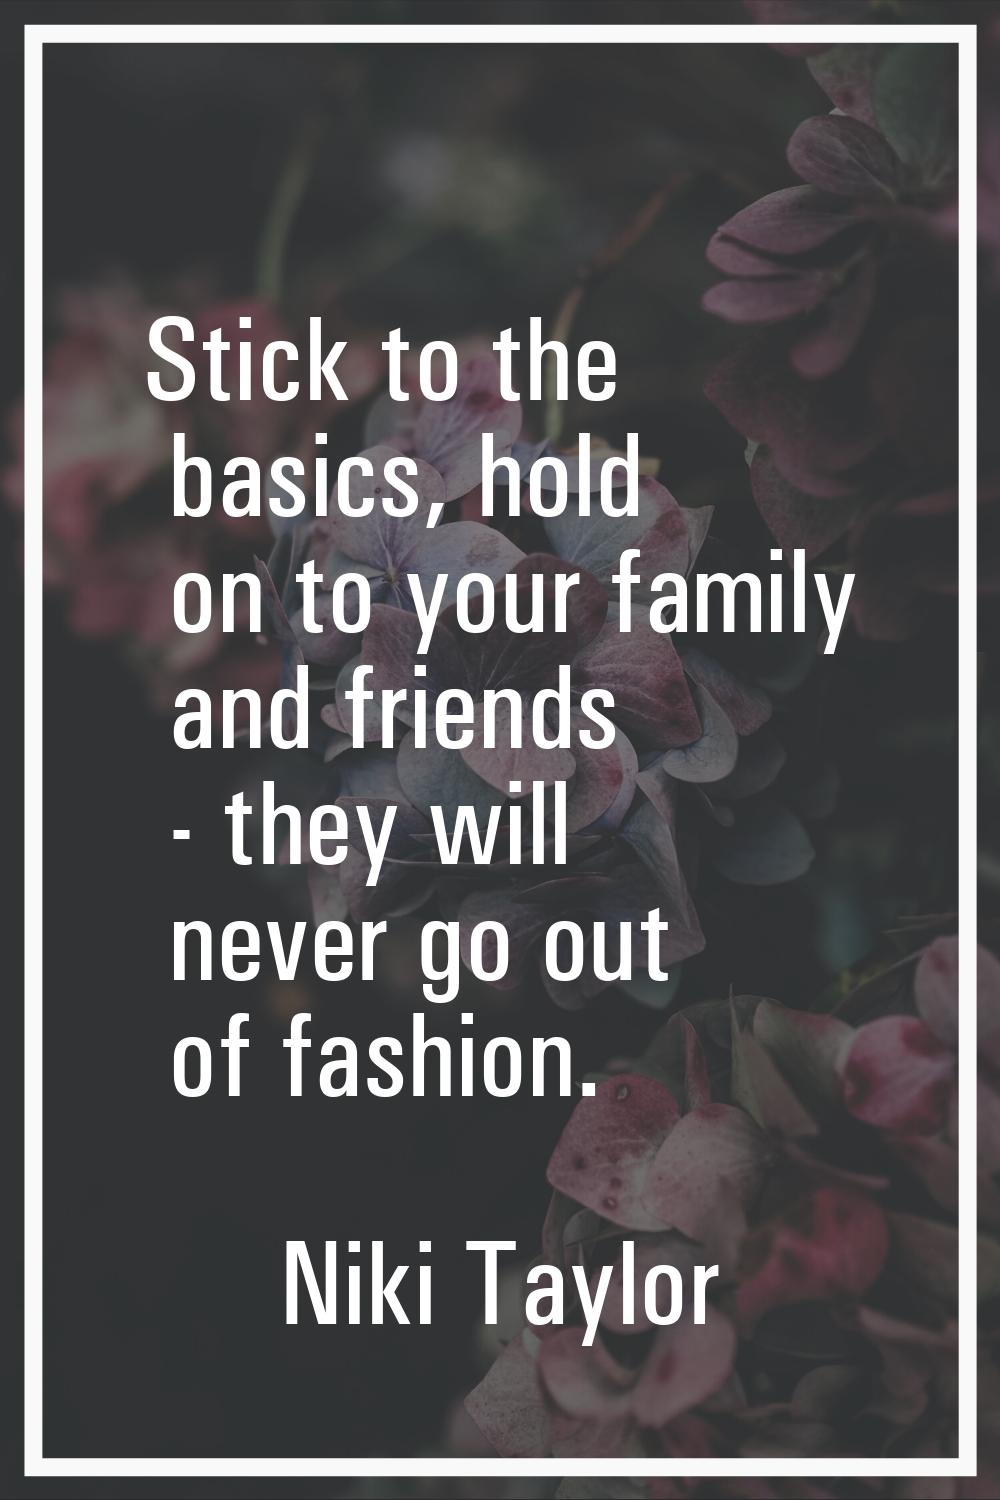 Stick to the basics, hold on to your family and friends - they will never go out of fashion.